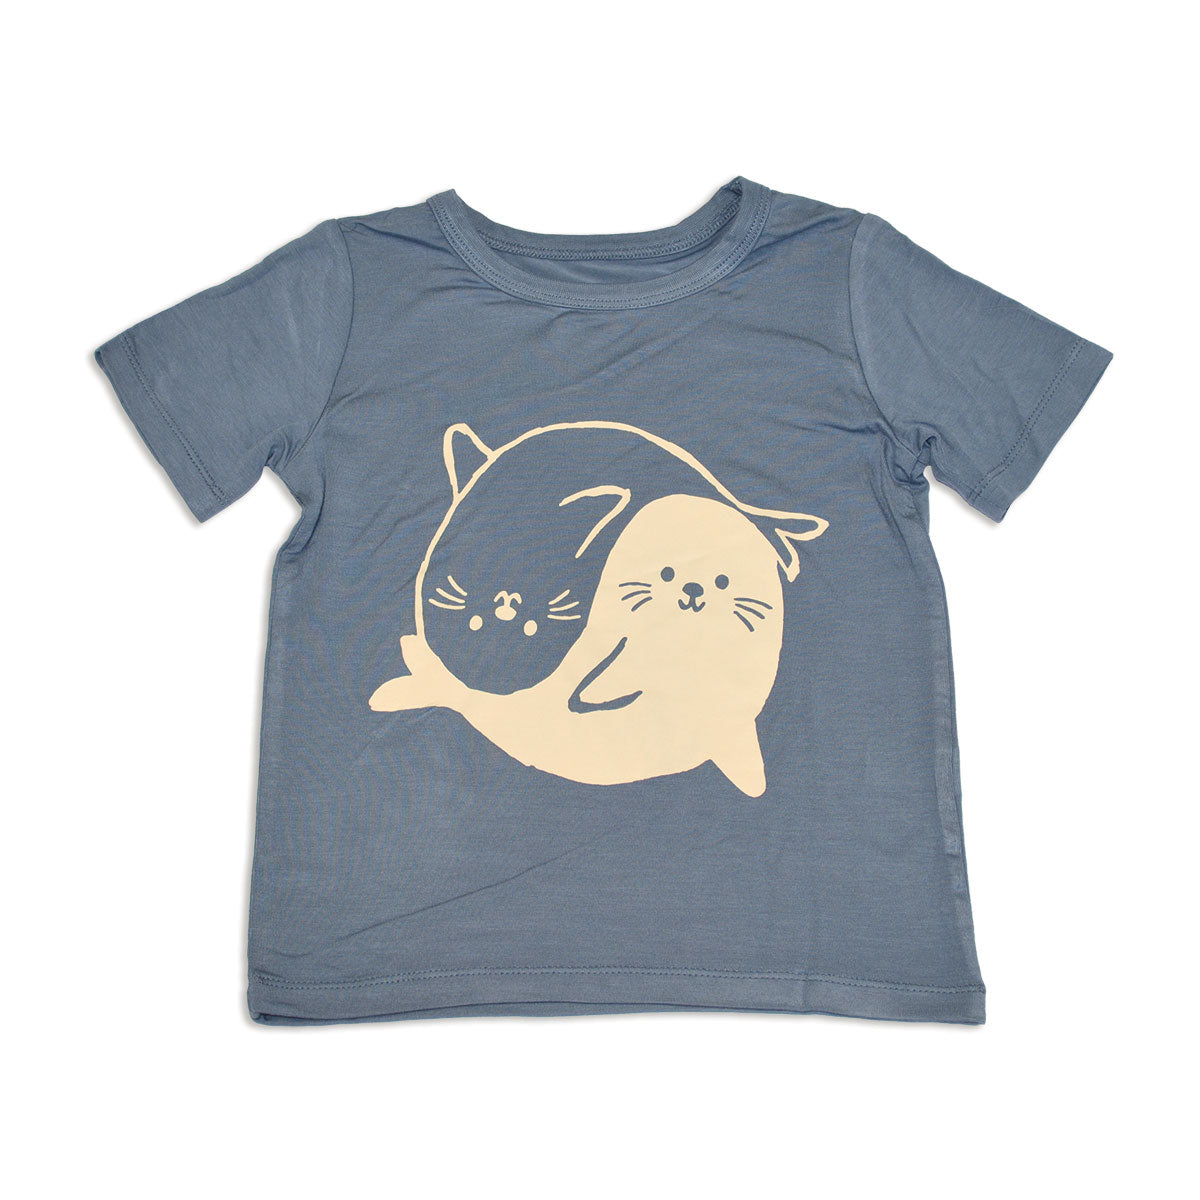 Little & Lively - Adult Unisex Crewneck Bamboo/Cotton T-Shirt | Ash X-Small